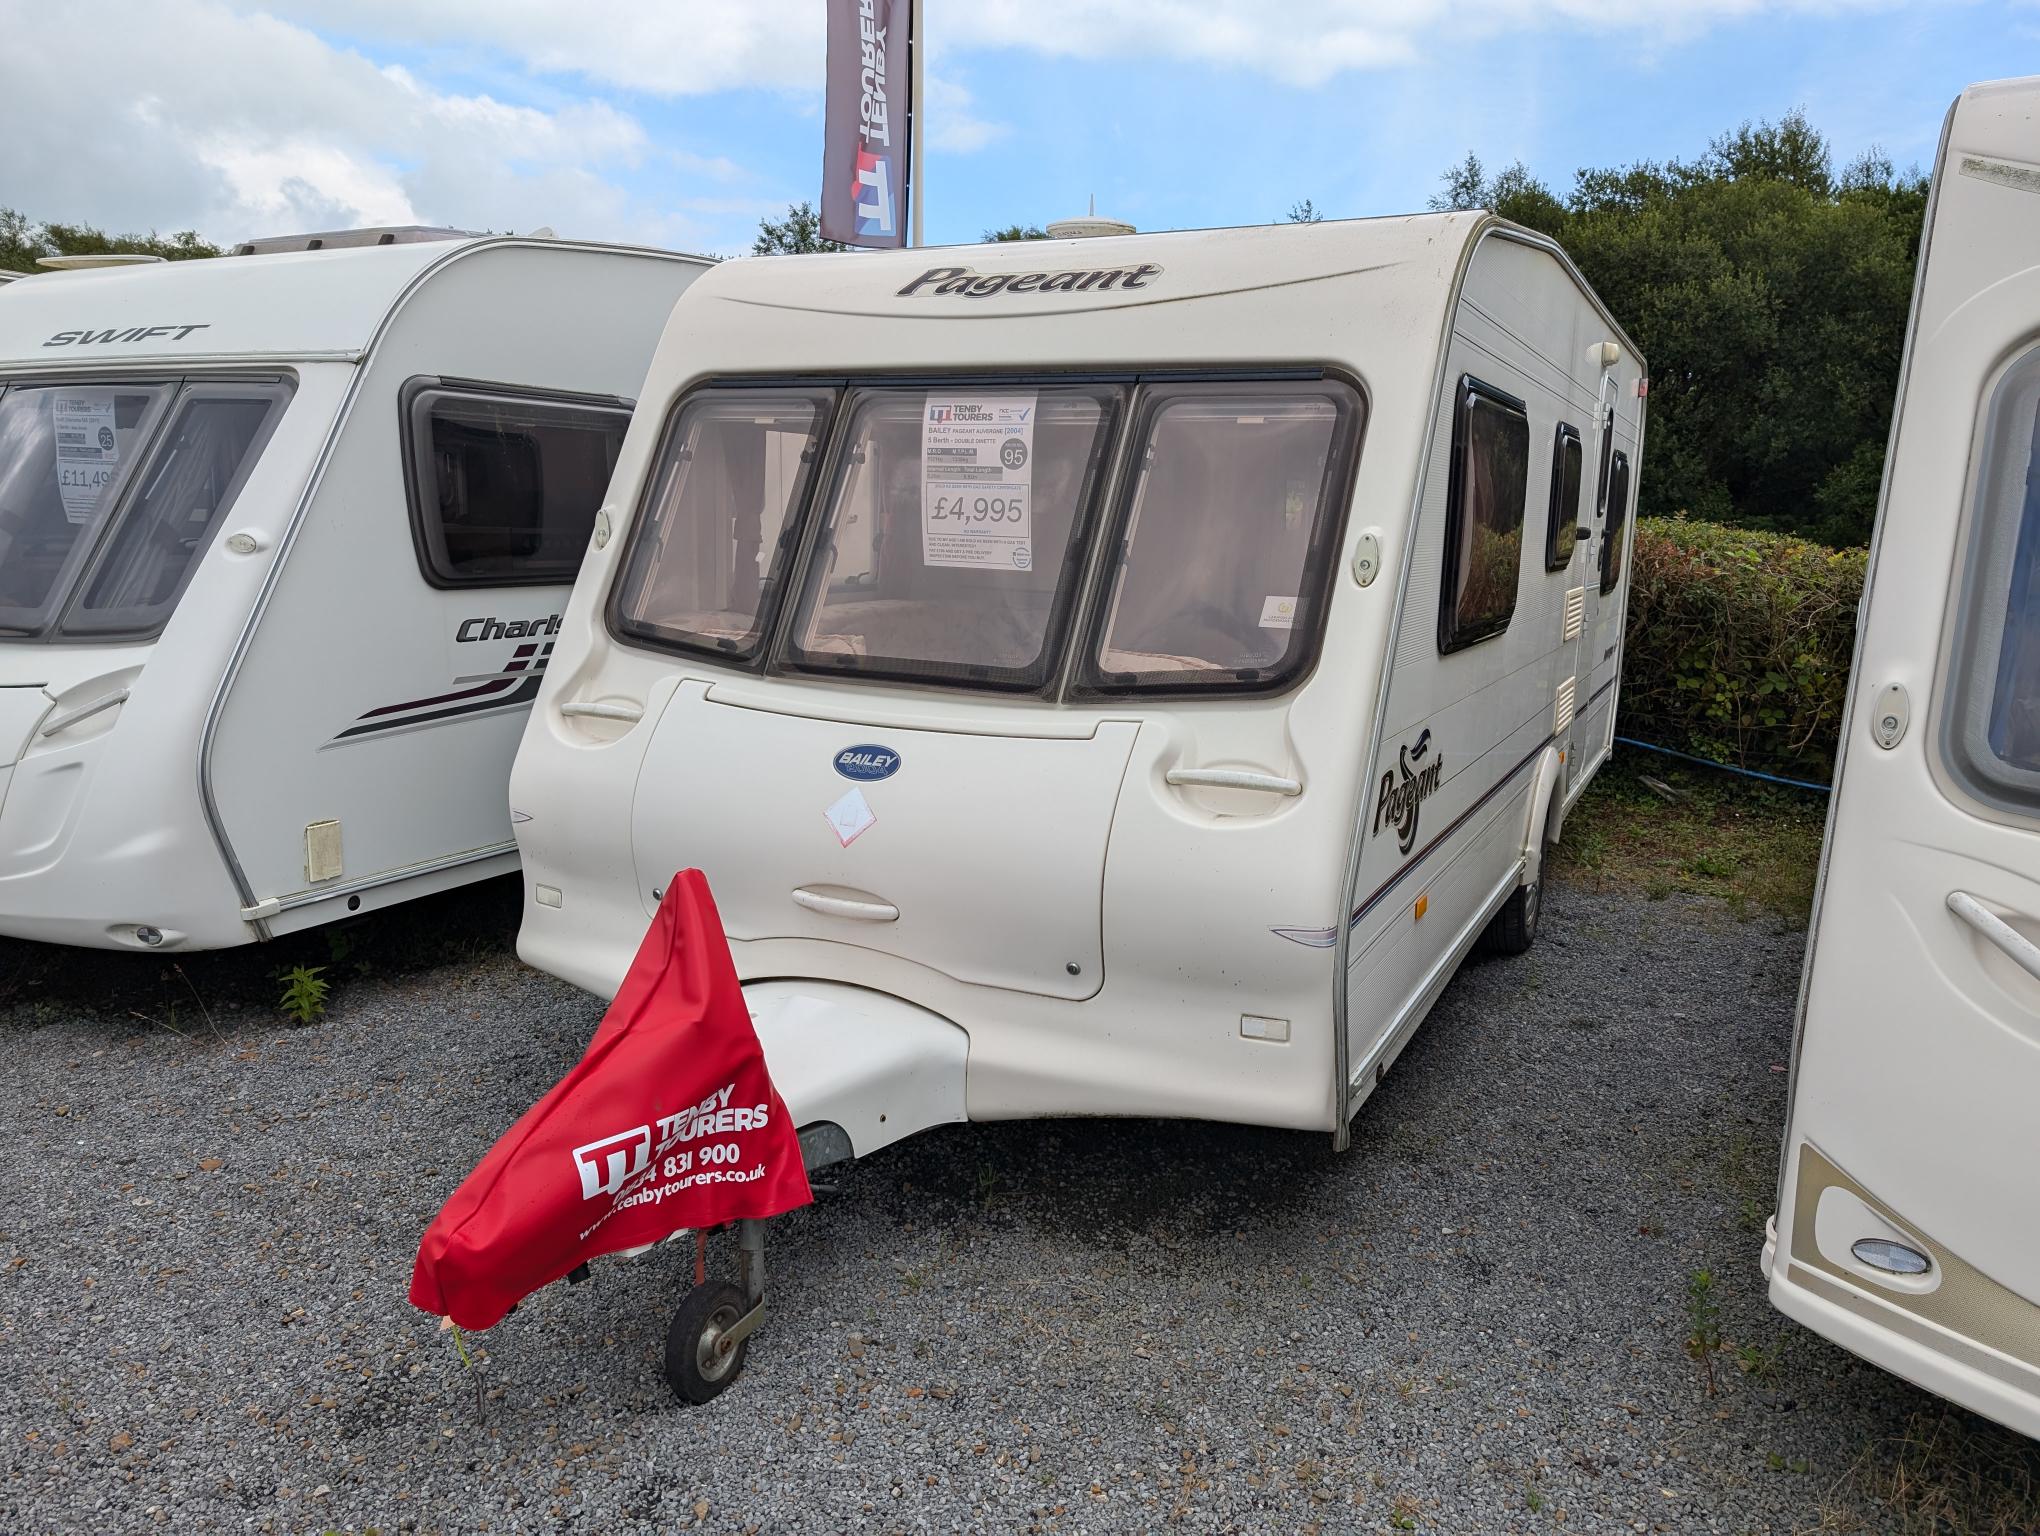 BAILEY PAGEANT AUVERGNE  For Sale